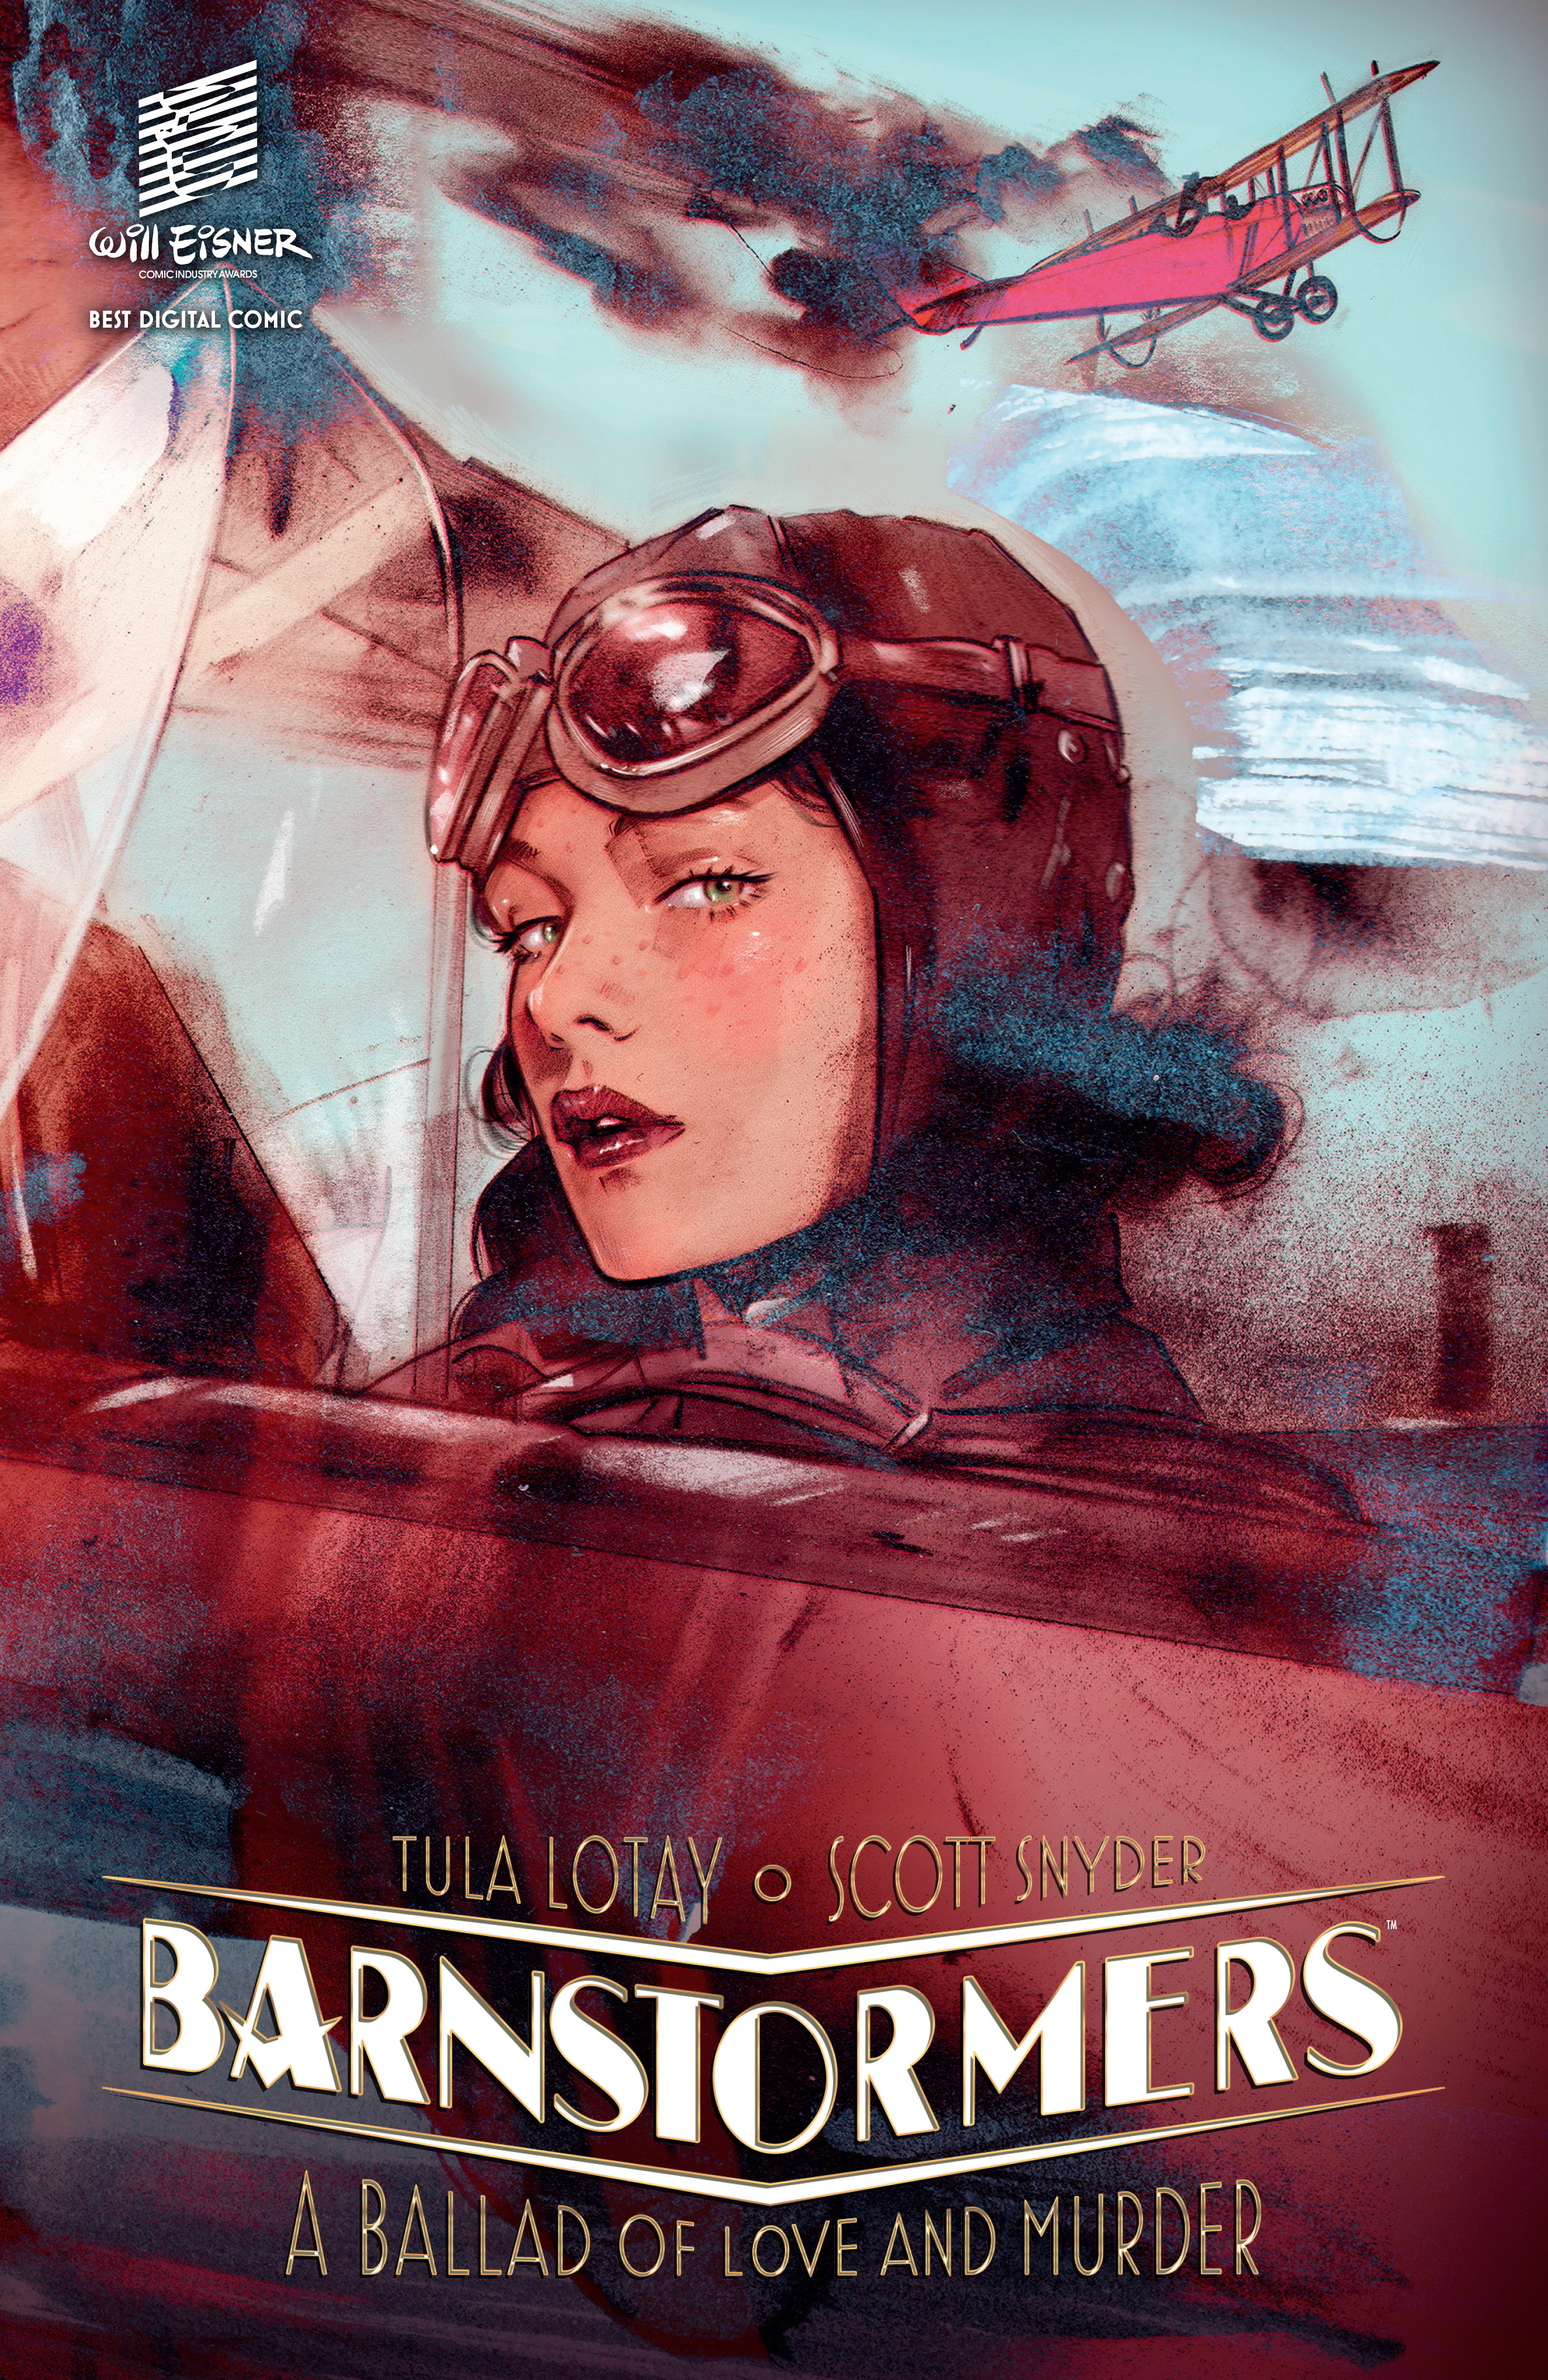 Barnstormers A Ballad of Love And Murder Graphic Novel